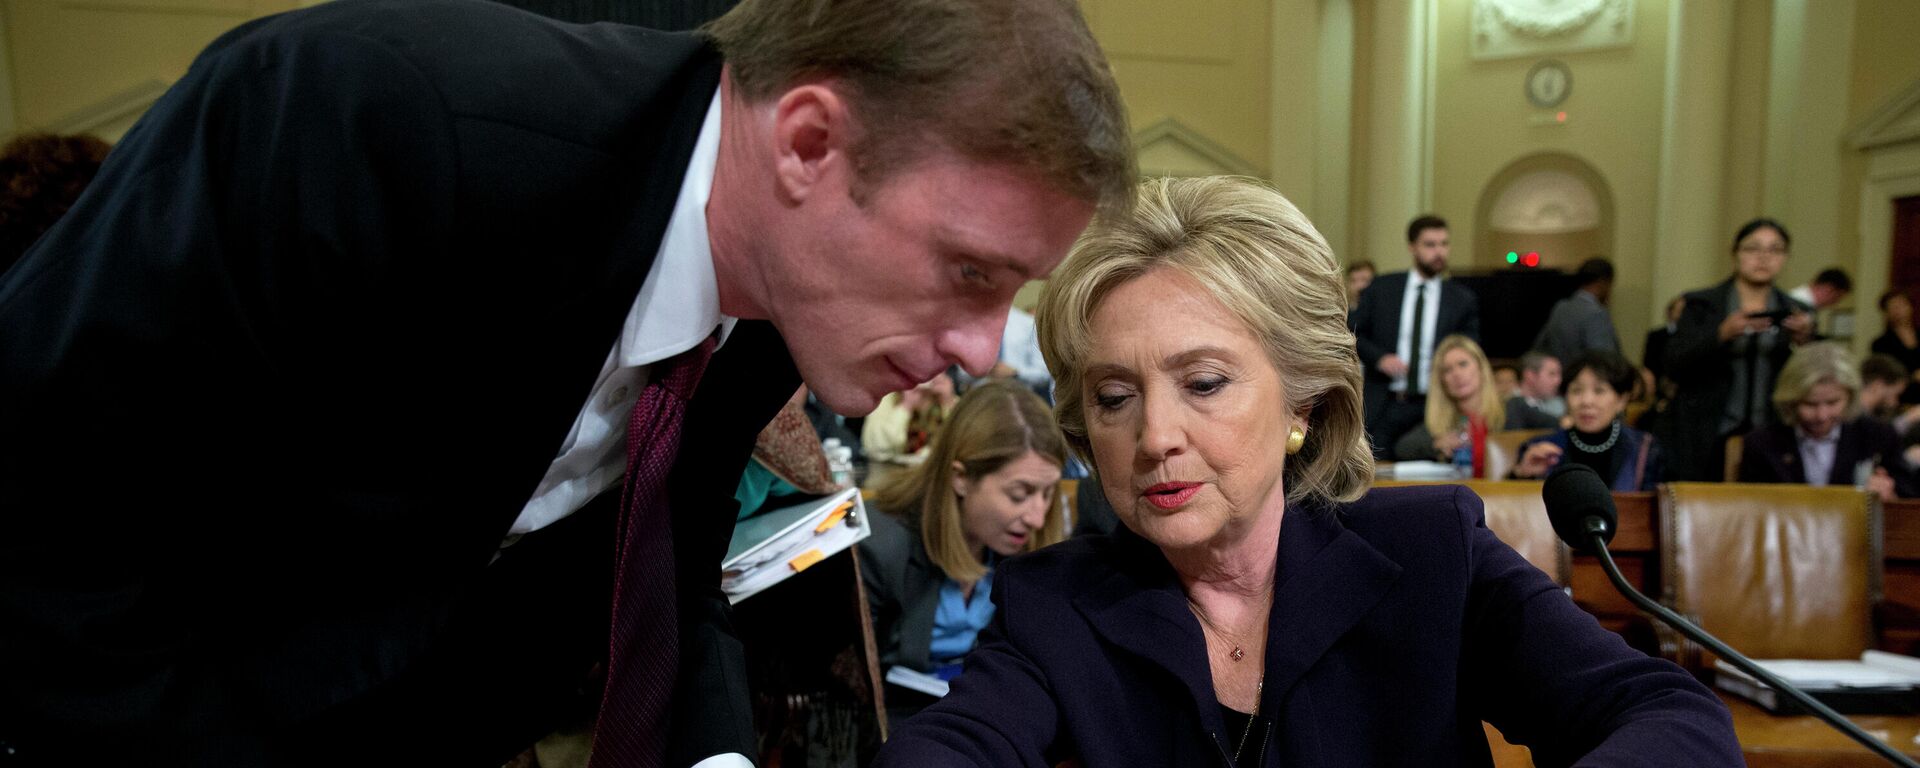 Democratic presidential candidate former Secretary of State Hillary Rodham Clinton talks with Jake Sullivan, a former staff member for her at the State Department, during a break in testimony on Capitol Hill in Washington, Thursday, Oct. 22, 2015 - Sputnik International, 1920, 14.10.2021